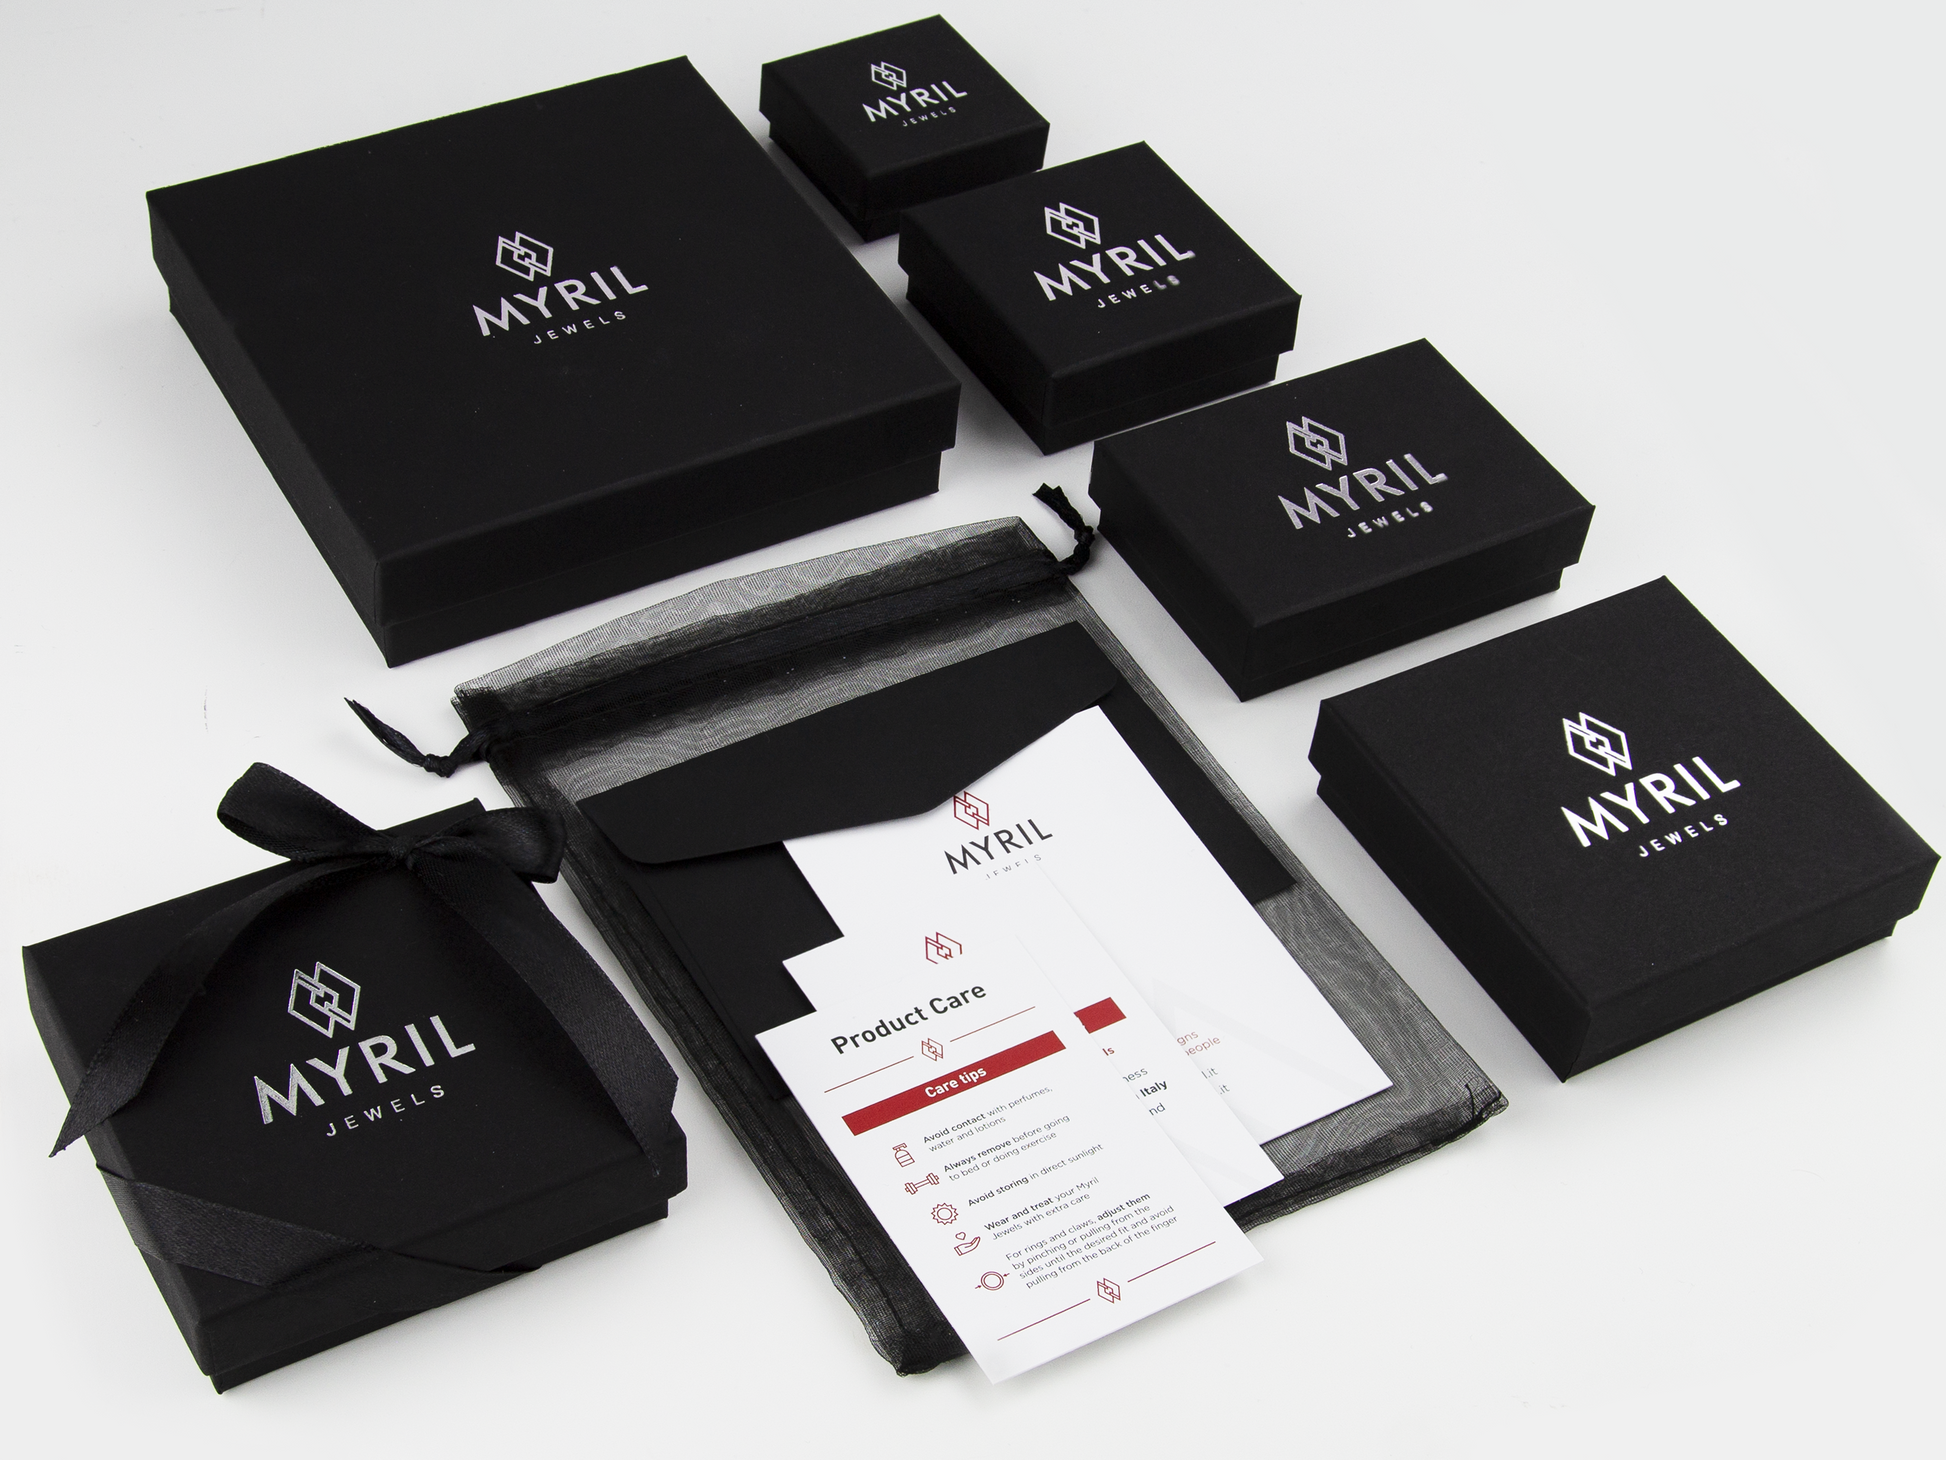 An array of Myril Jewels' sophisticated packaging, featuring elegant black boxes of various sizes with the brand's logo in white. The set includes beautifully tied ribbons on cloth pouches, ensuring a luxurious unboxing experience. Accompanying product care cards provide instructions, embodying the brand's commitment to quality and customer service. This presentation is ideal for the neo-gothic jewelry enthusiast, reflecting the dark-avantgarde and gothic-chic essence of Myril Jewels